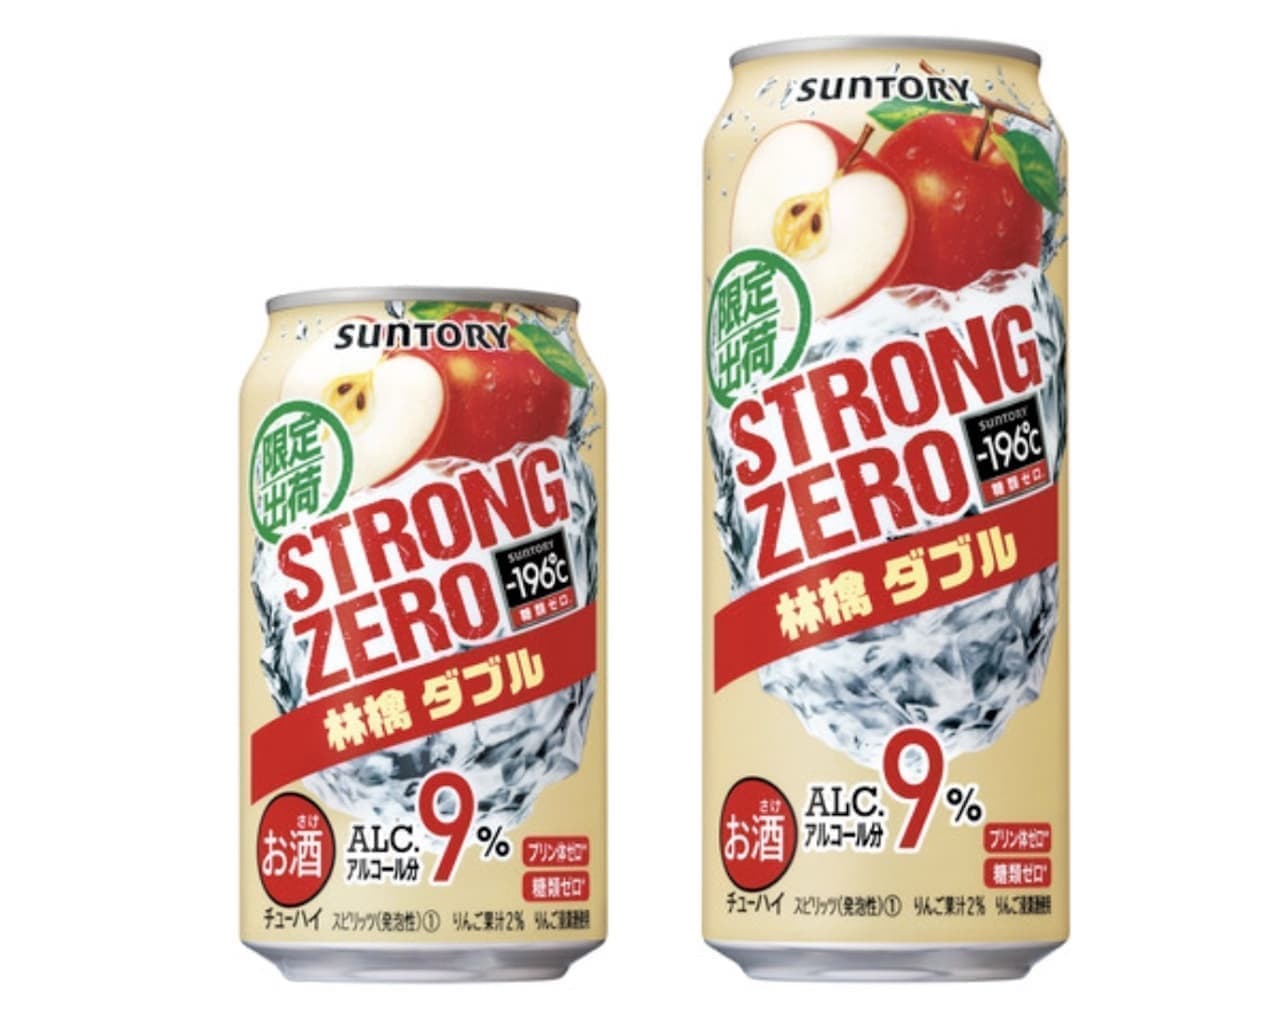 Limited time offer "-196 ℃ Strong Zero [Apple Double]"